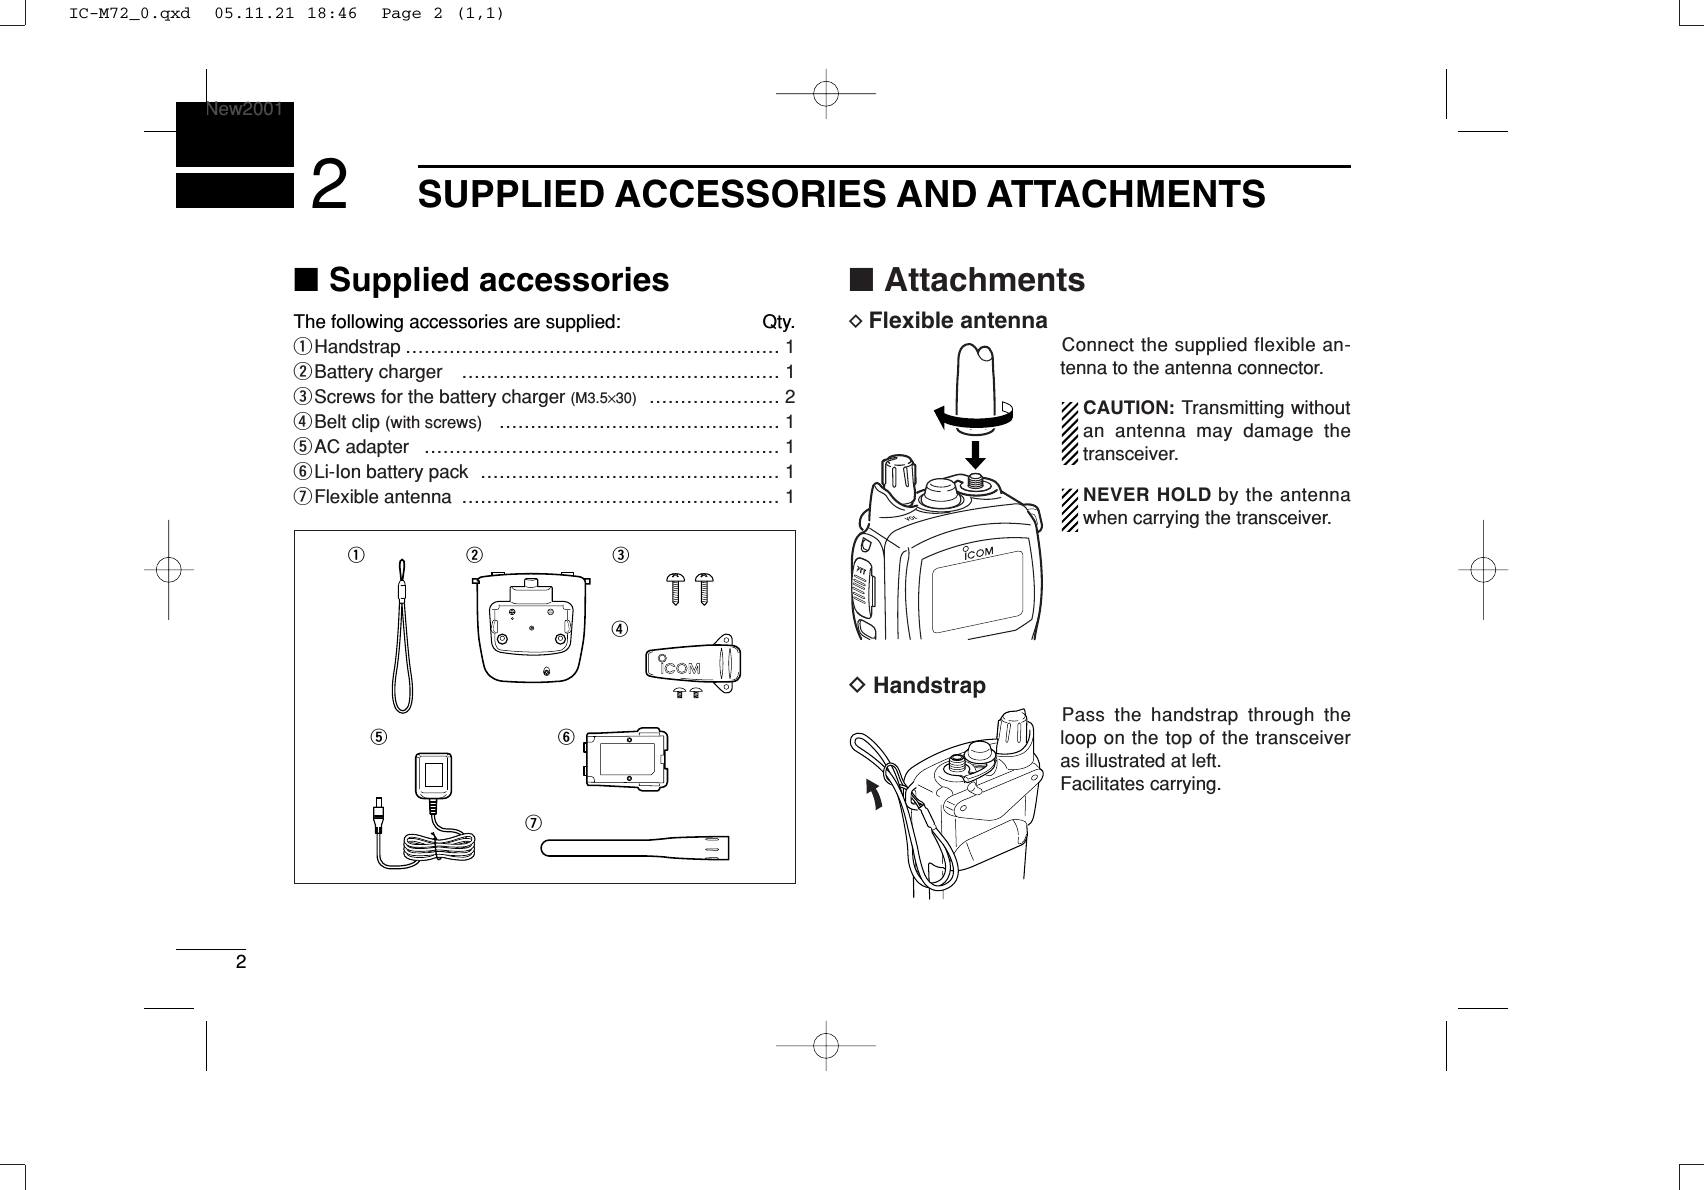 2SUPPLIED ACCESSORIES AND ATTACHMENTSNew20012■Supplied accessoriesThe following accessories are supplied: Qty.qHandstrap …………………………………………………… 1wBattery charger  …………………………………………… 1eScrews for the battery charger (M3.5×30) ………………… 2rBelt clip (with screws) ……………………………………… 1tAC adapter  ………………………………………………… 1yLi-Ion battery pack  ………………………………………… 1uFlexible antenna  …………………………………………… 1■AttachmentsDFlexible antennaConnect the supplied flexible an-tenna to the antenna connector.CAUTION: Transmitting withoutan antenna may damage thetransceiver.NEVER HOLD by the antennawhen carrying the transceiver.DHandstrapPass the handstrap through theloop on the top of the transceiveras illustrated at left. Facilitates carrying.qw ertyuIC-M72_0.qxd  05.11.21 18:46  Page 2 (1,1)